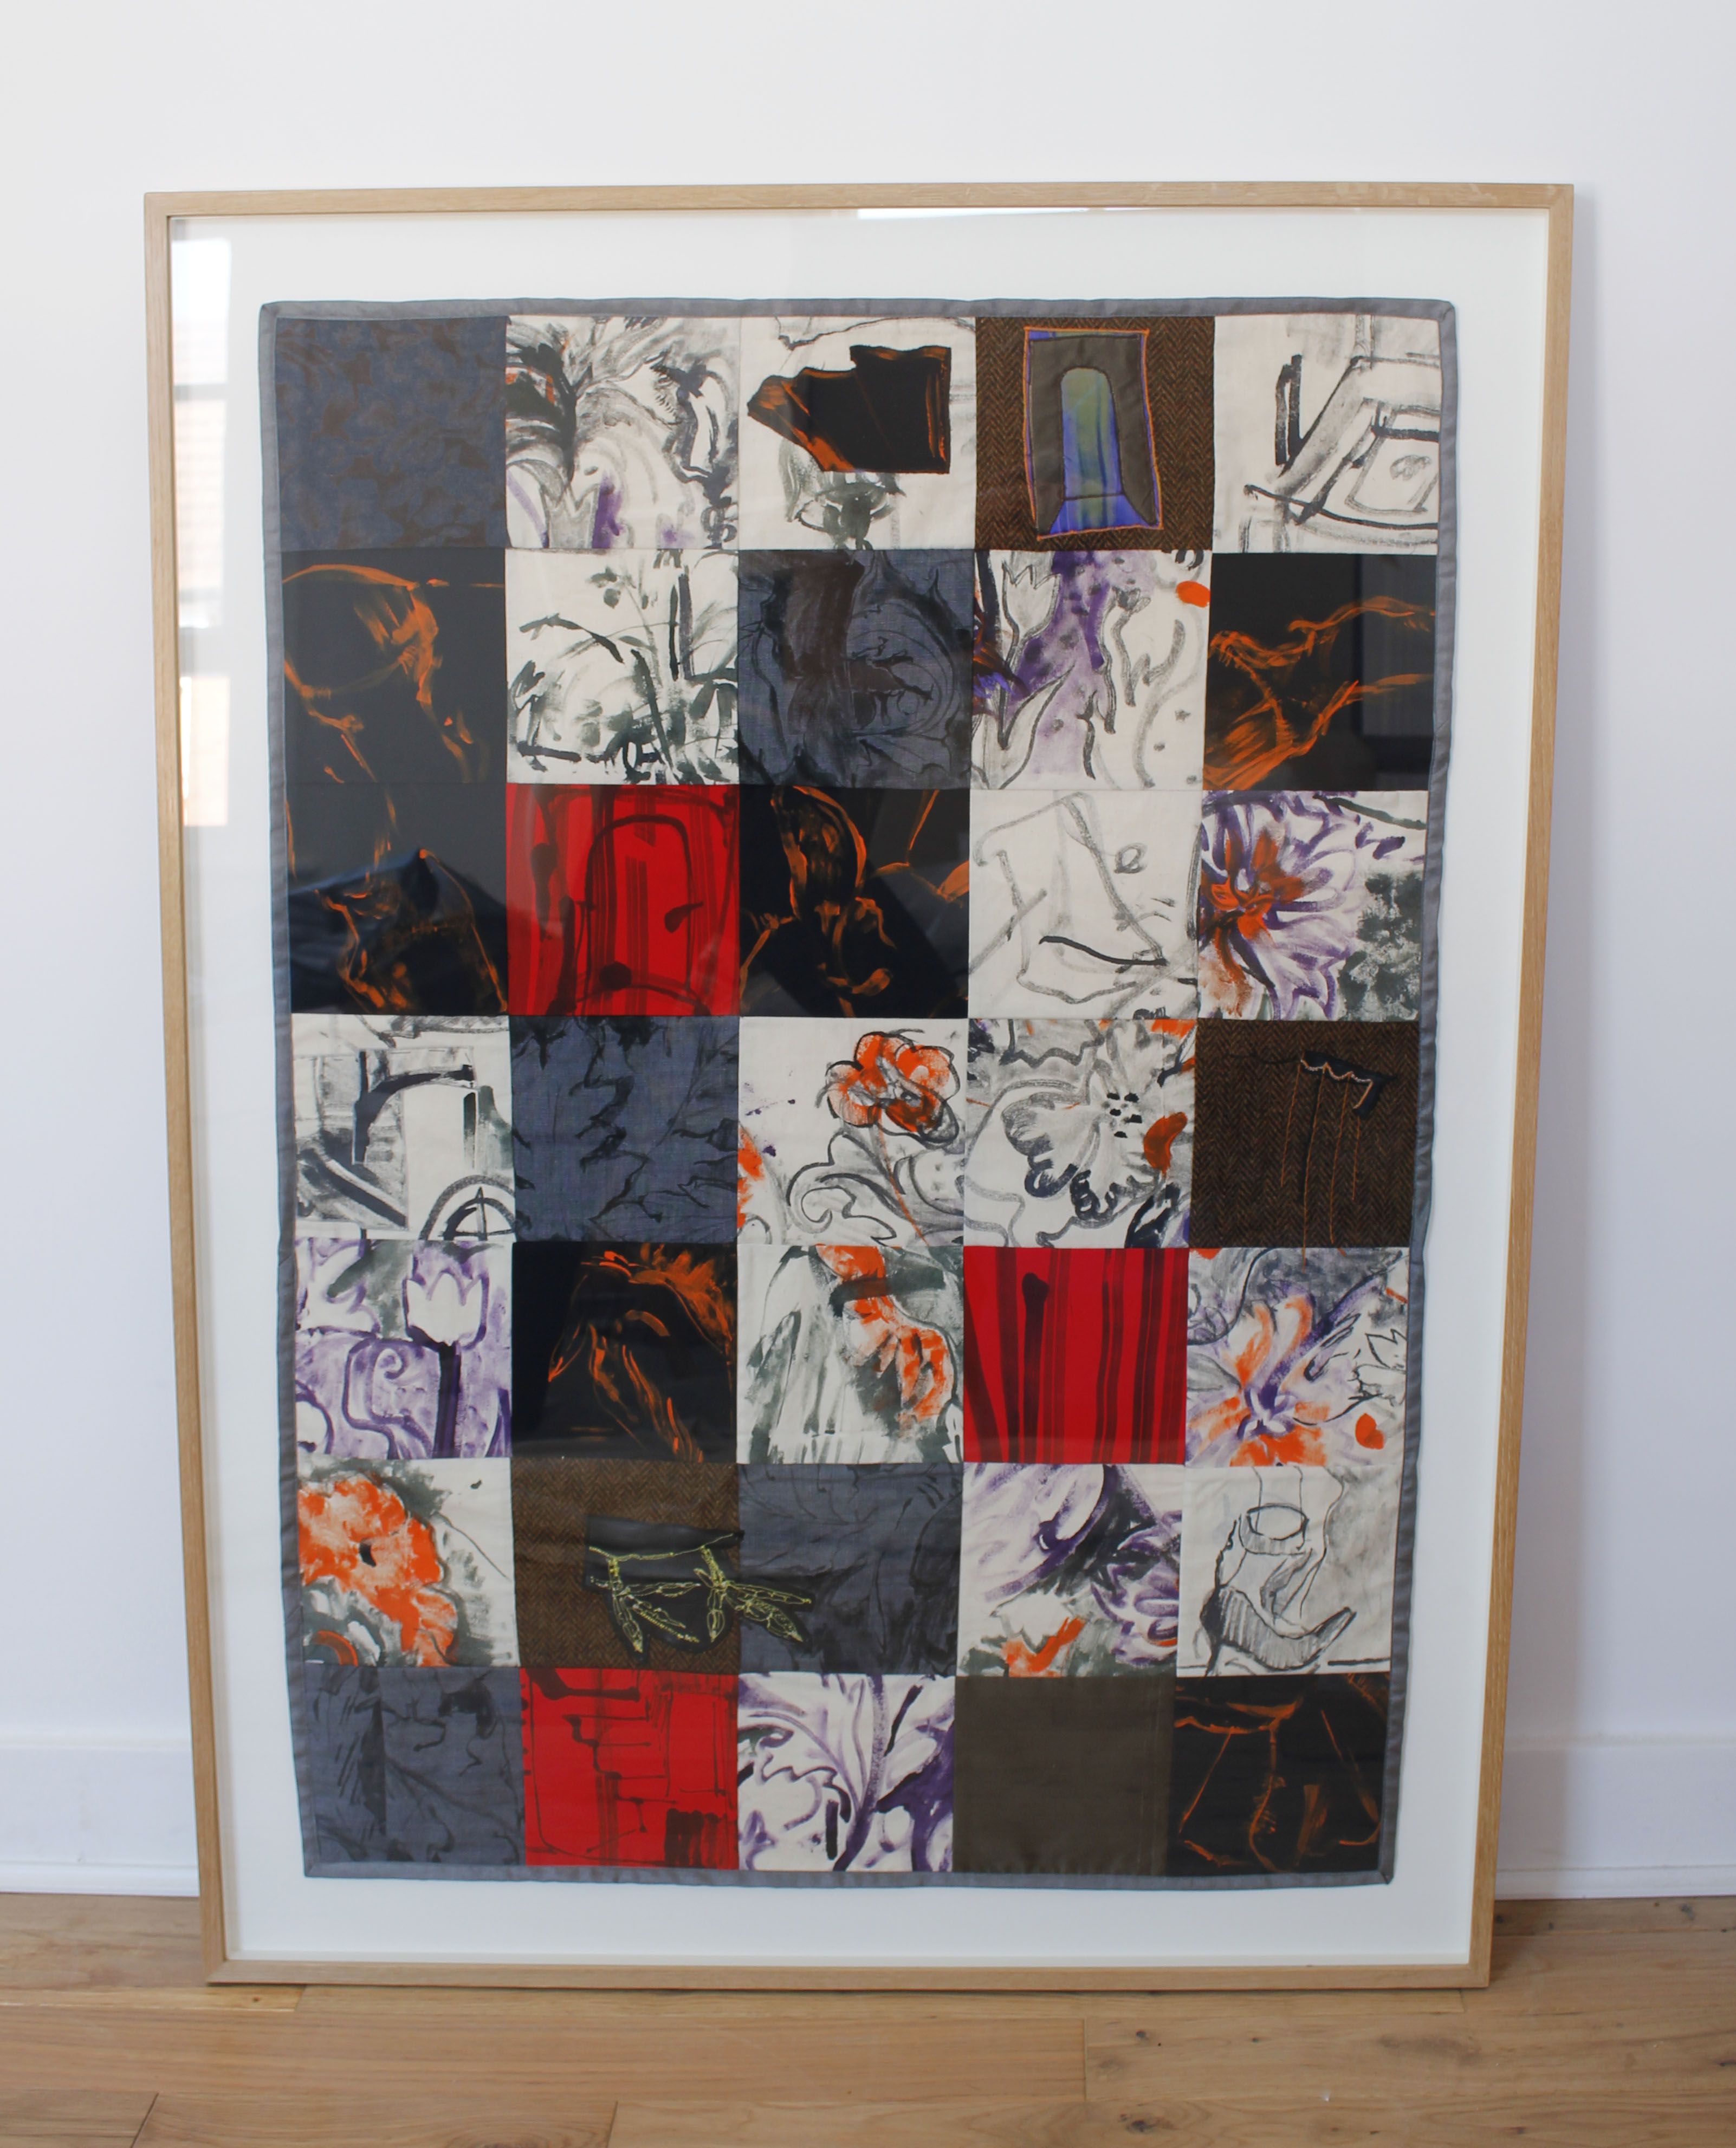 On All Floors, 2020 Framed patchwork wall hanging. Hand painted flowers in purple on canvas, trotters painted in orange on black squares and embroidery of coots feet in yellow thread on black leather   